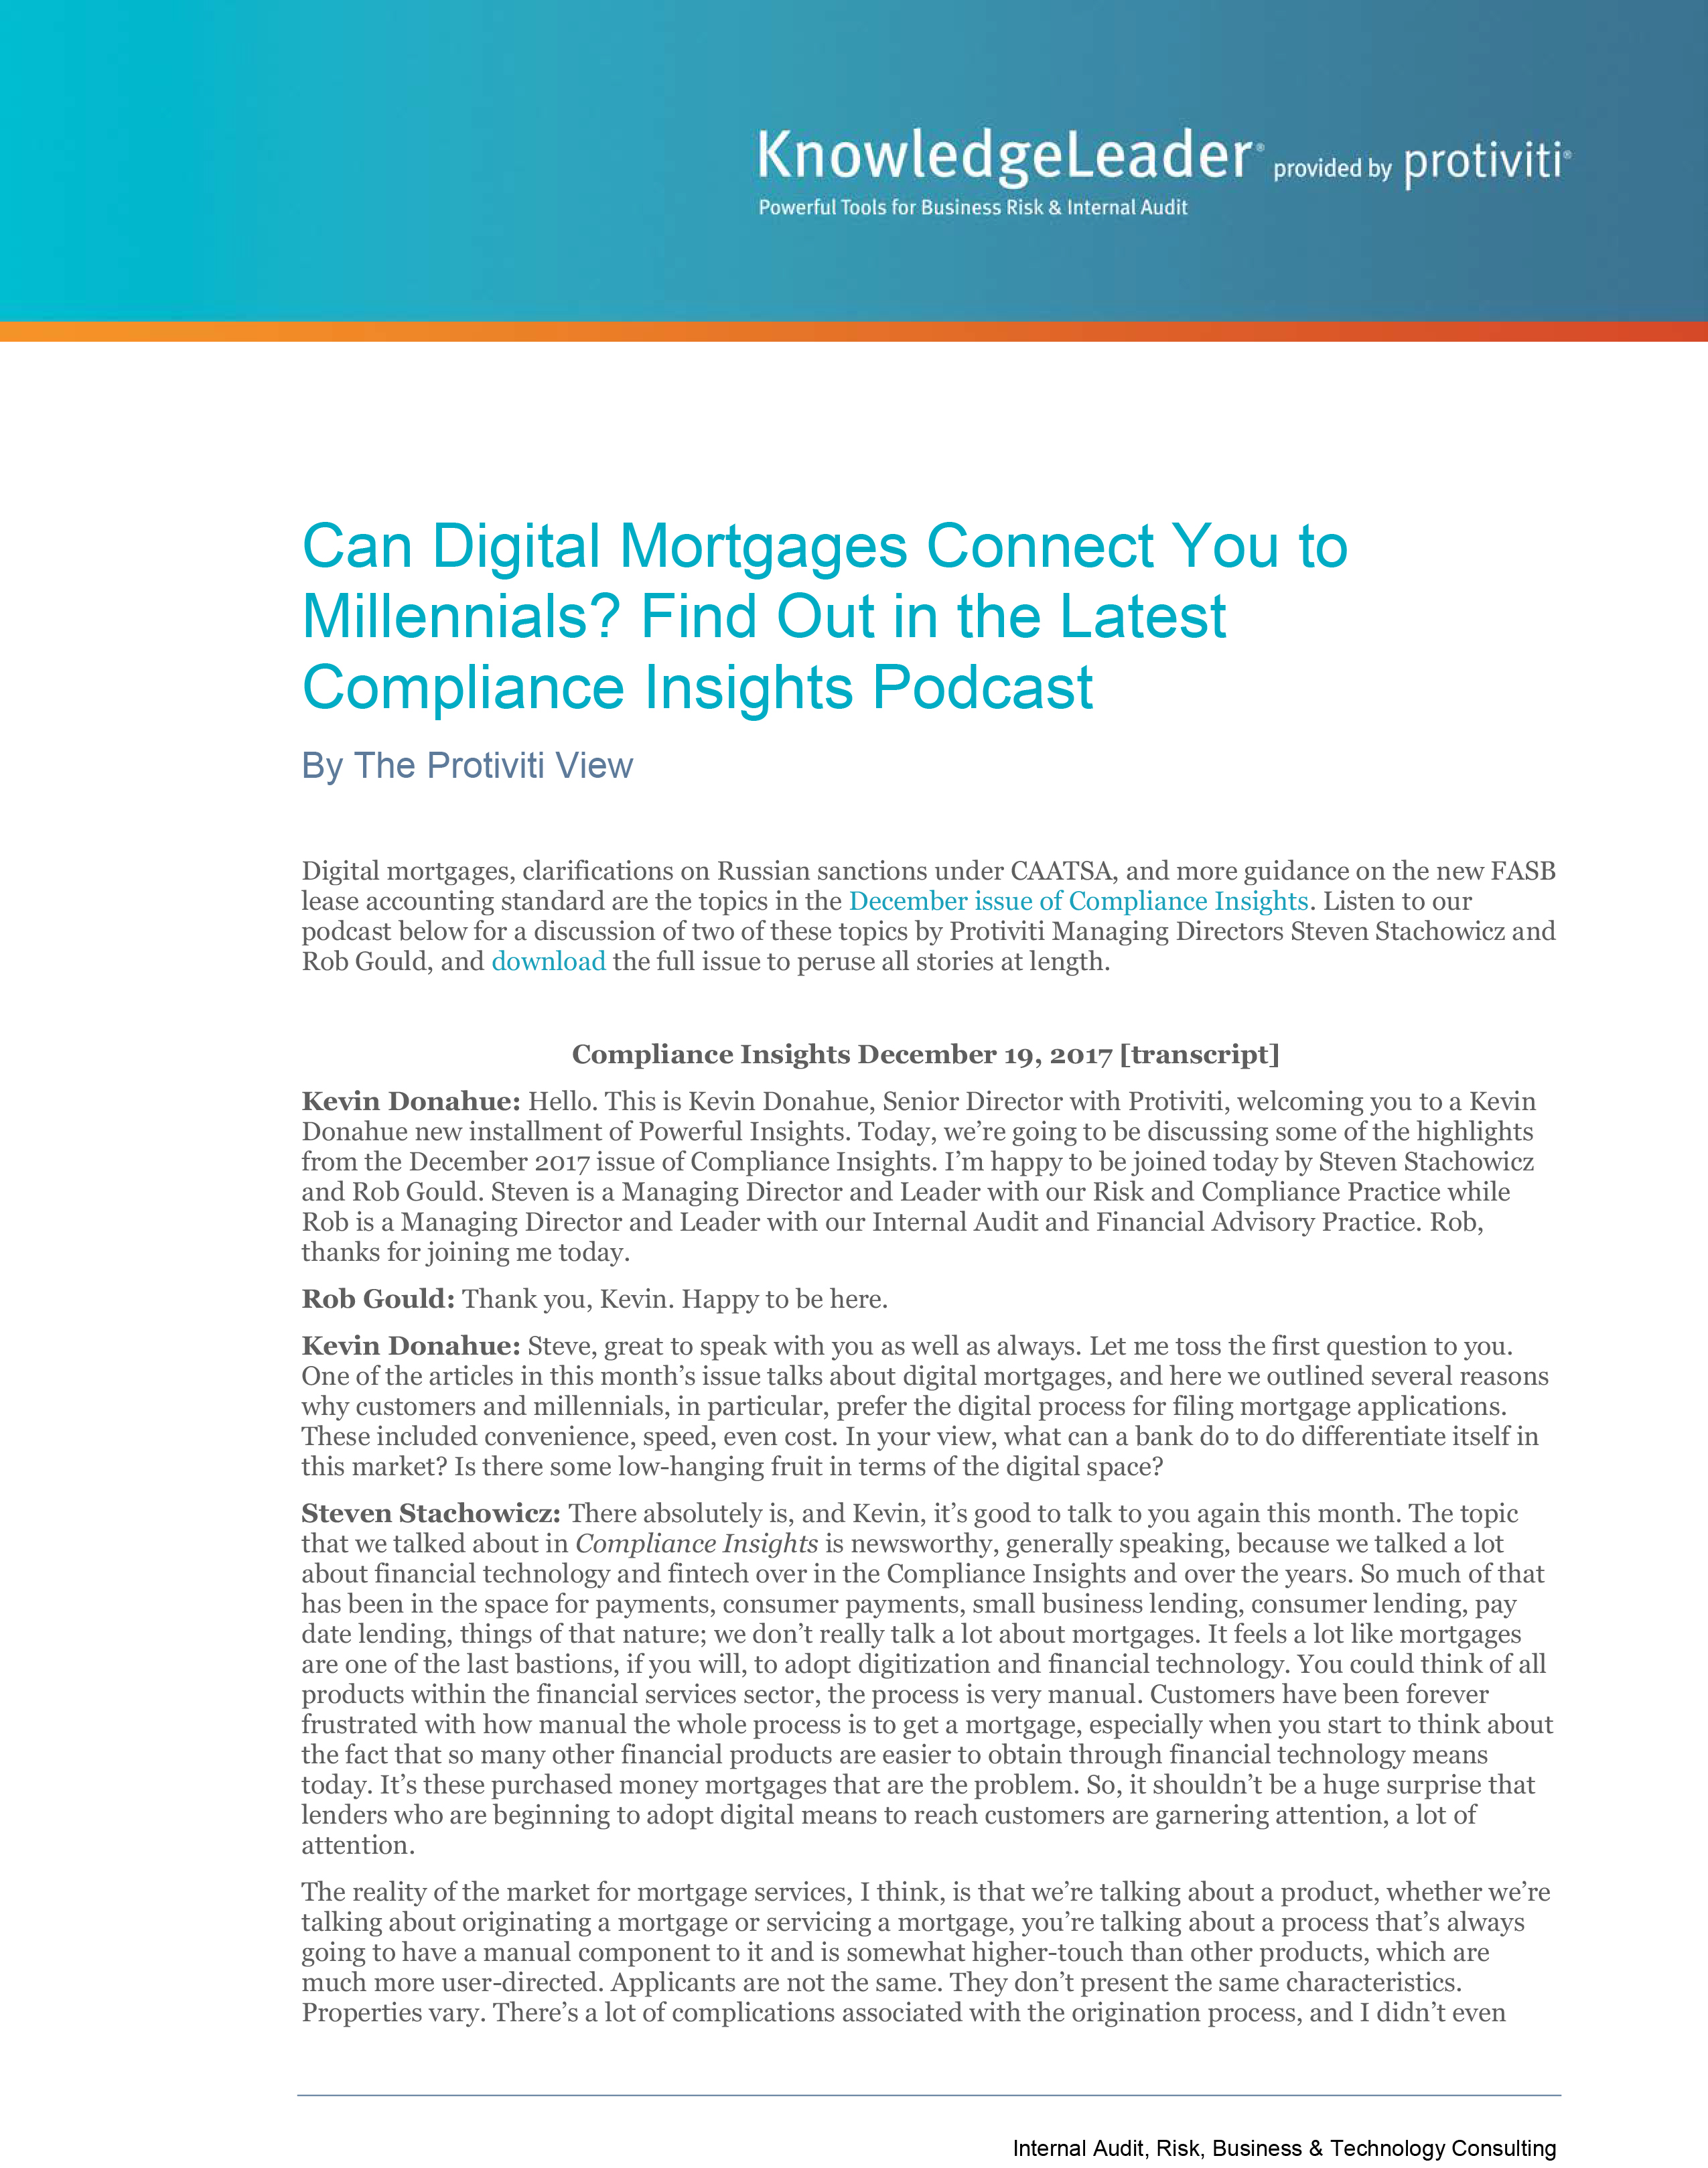 Screenshot of the first page of Can Digital Mortgages Connect You to Millennials? Find Out in the Latest Compliance Insights Podcast